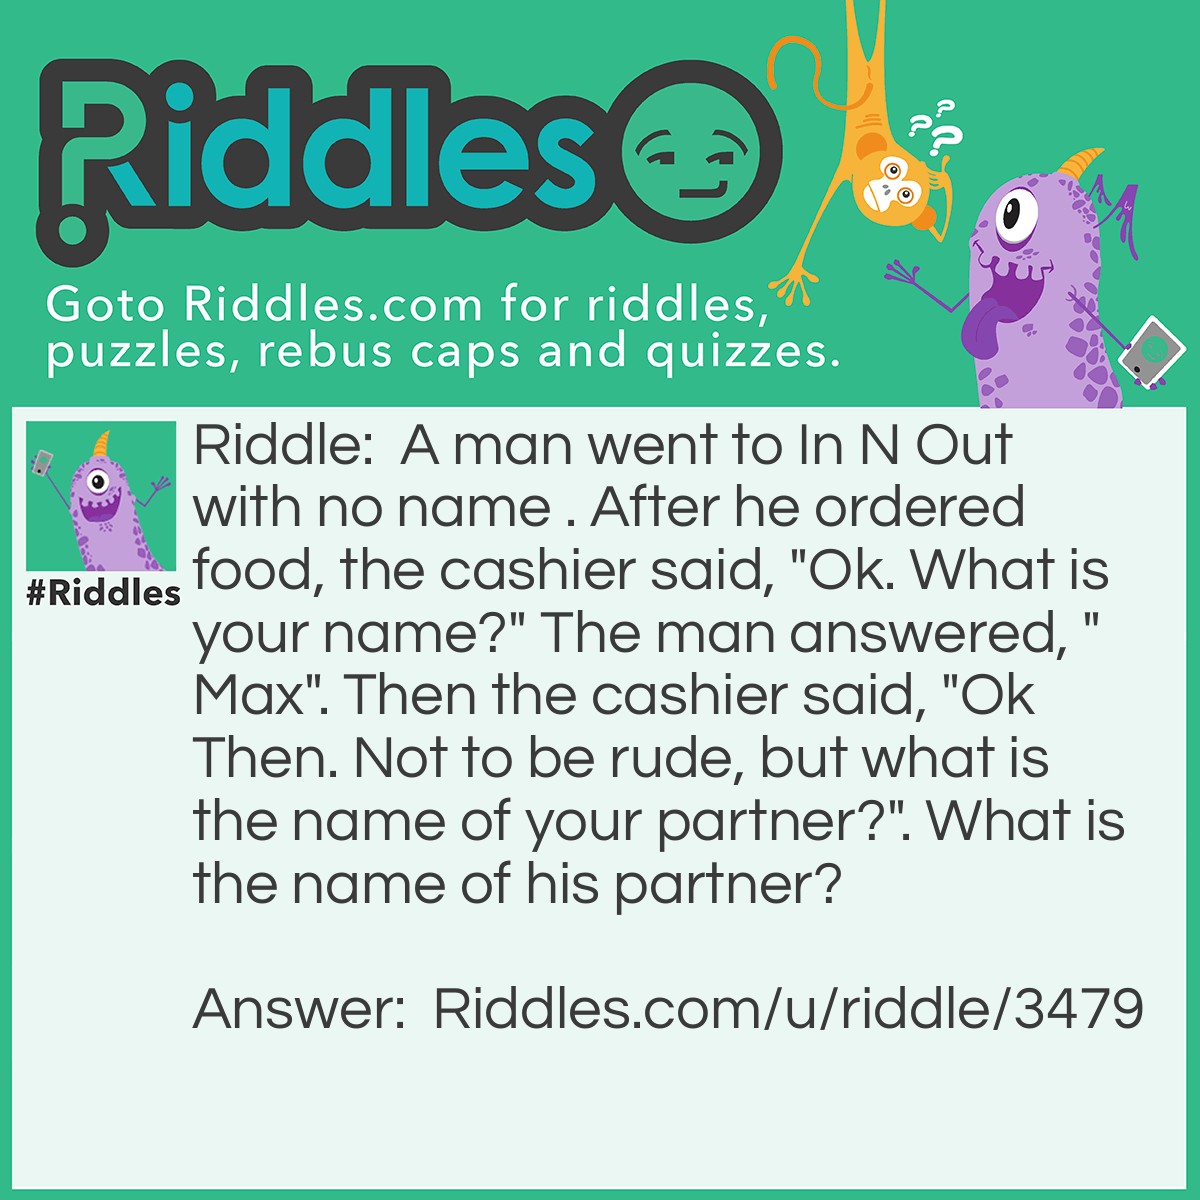 Riddle: A man went to In N Out with no name . After he ordered food, the cashier said, "Ok. What is your name?" The man answered, "Max". Then the cashier said, "Ok Then. Not to be rude, but what is the name of your partner?". What is the name of his partner? Answer: No Name.